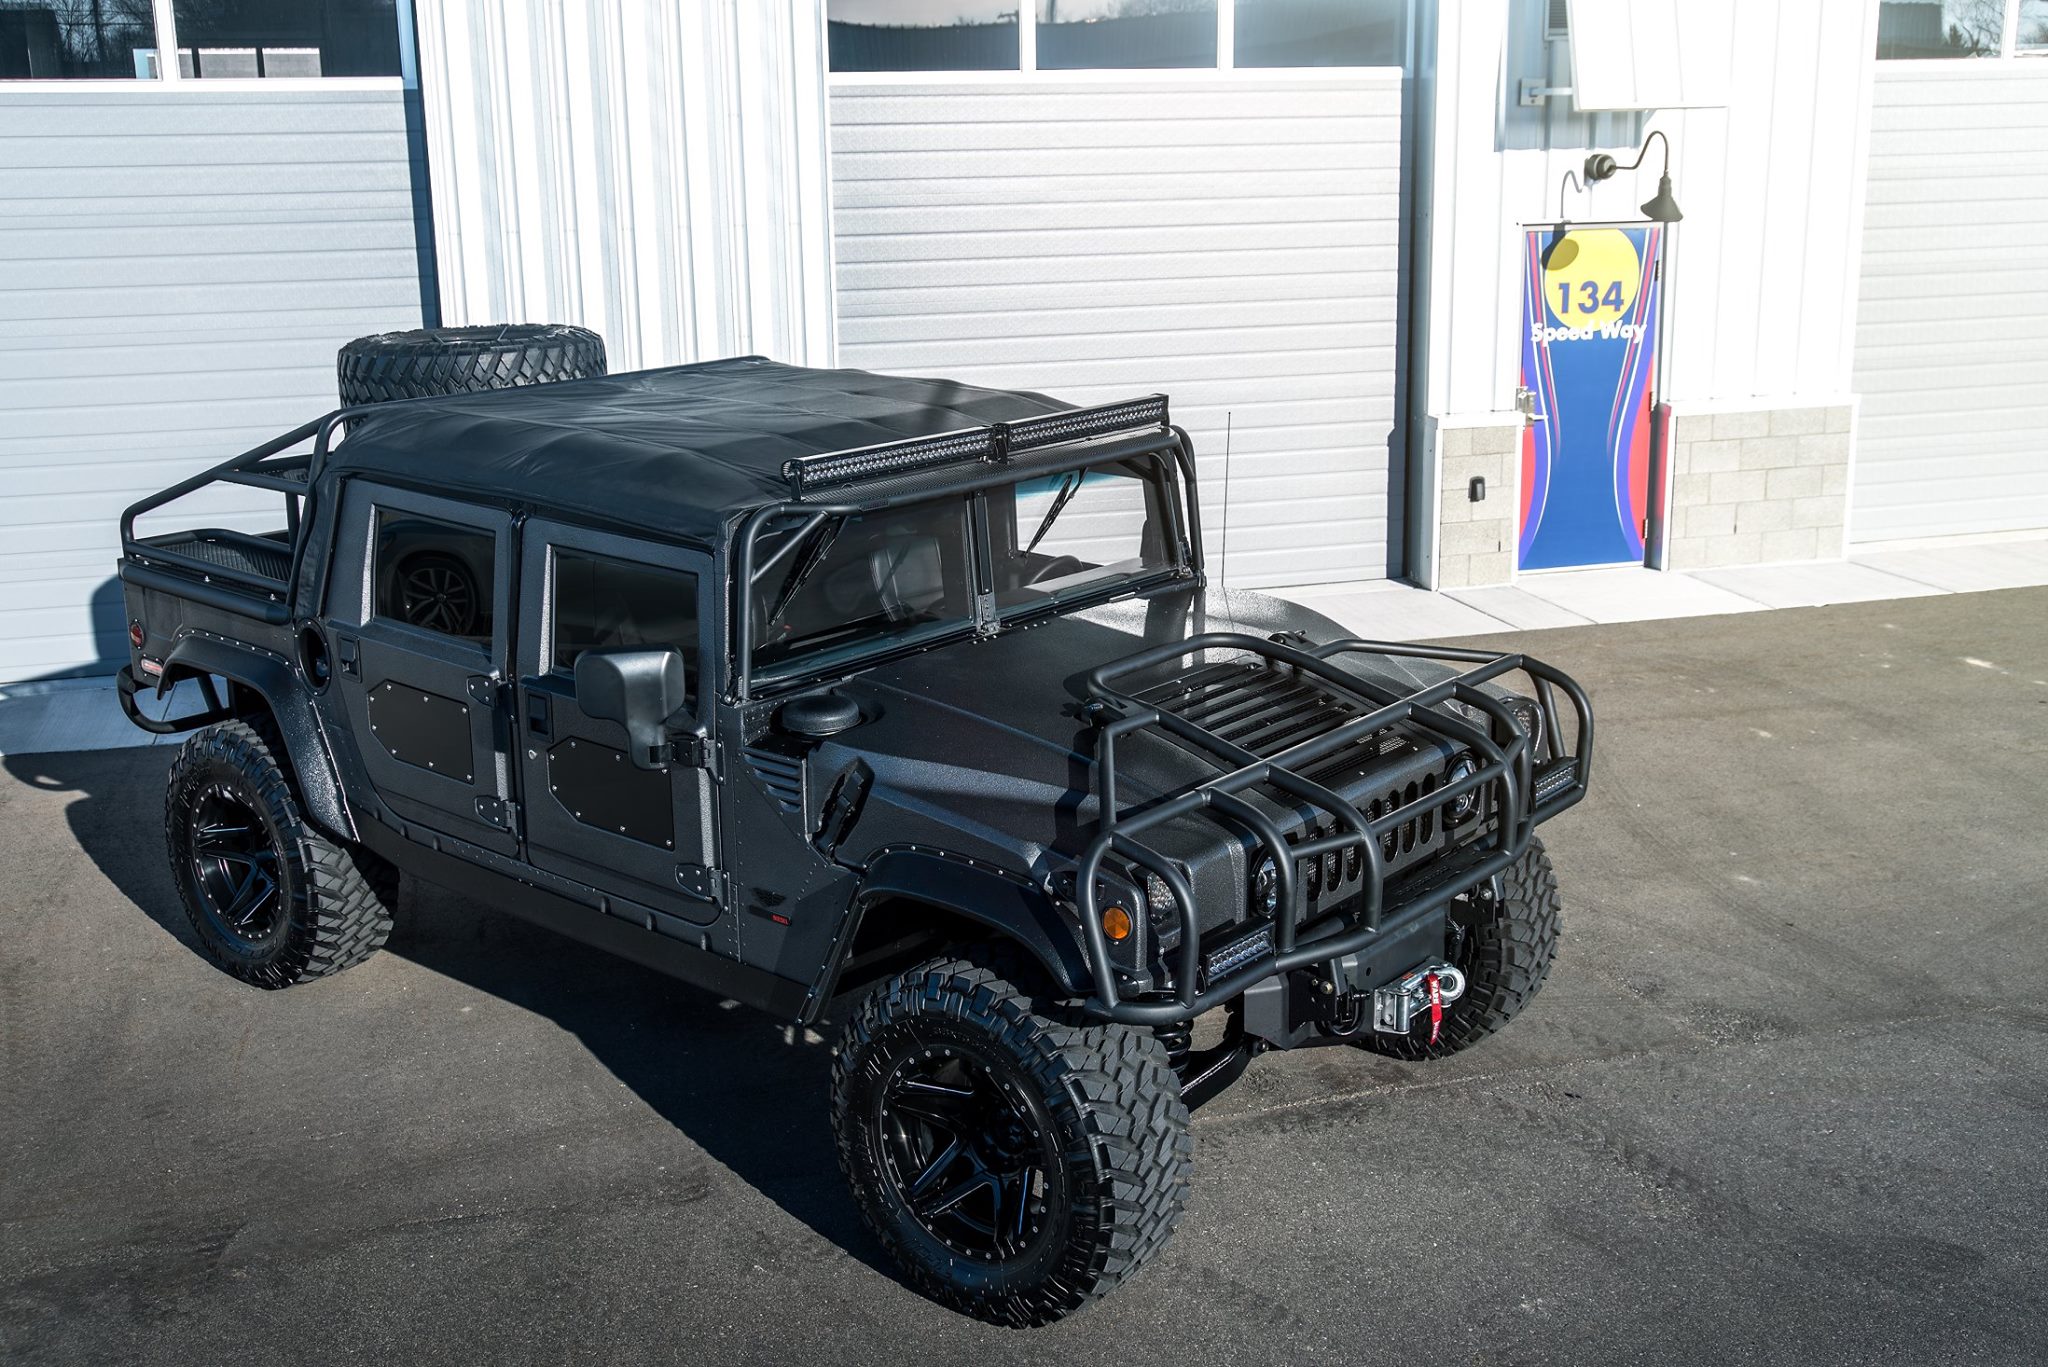 The Mil-Spec Automotive rebuild of the Hummer H1 is beefier and has more power than the original. | Facebook photo